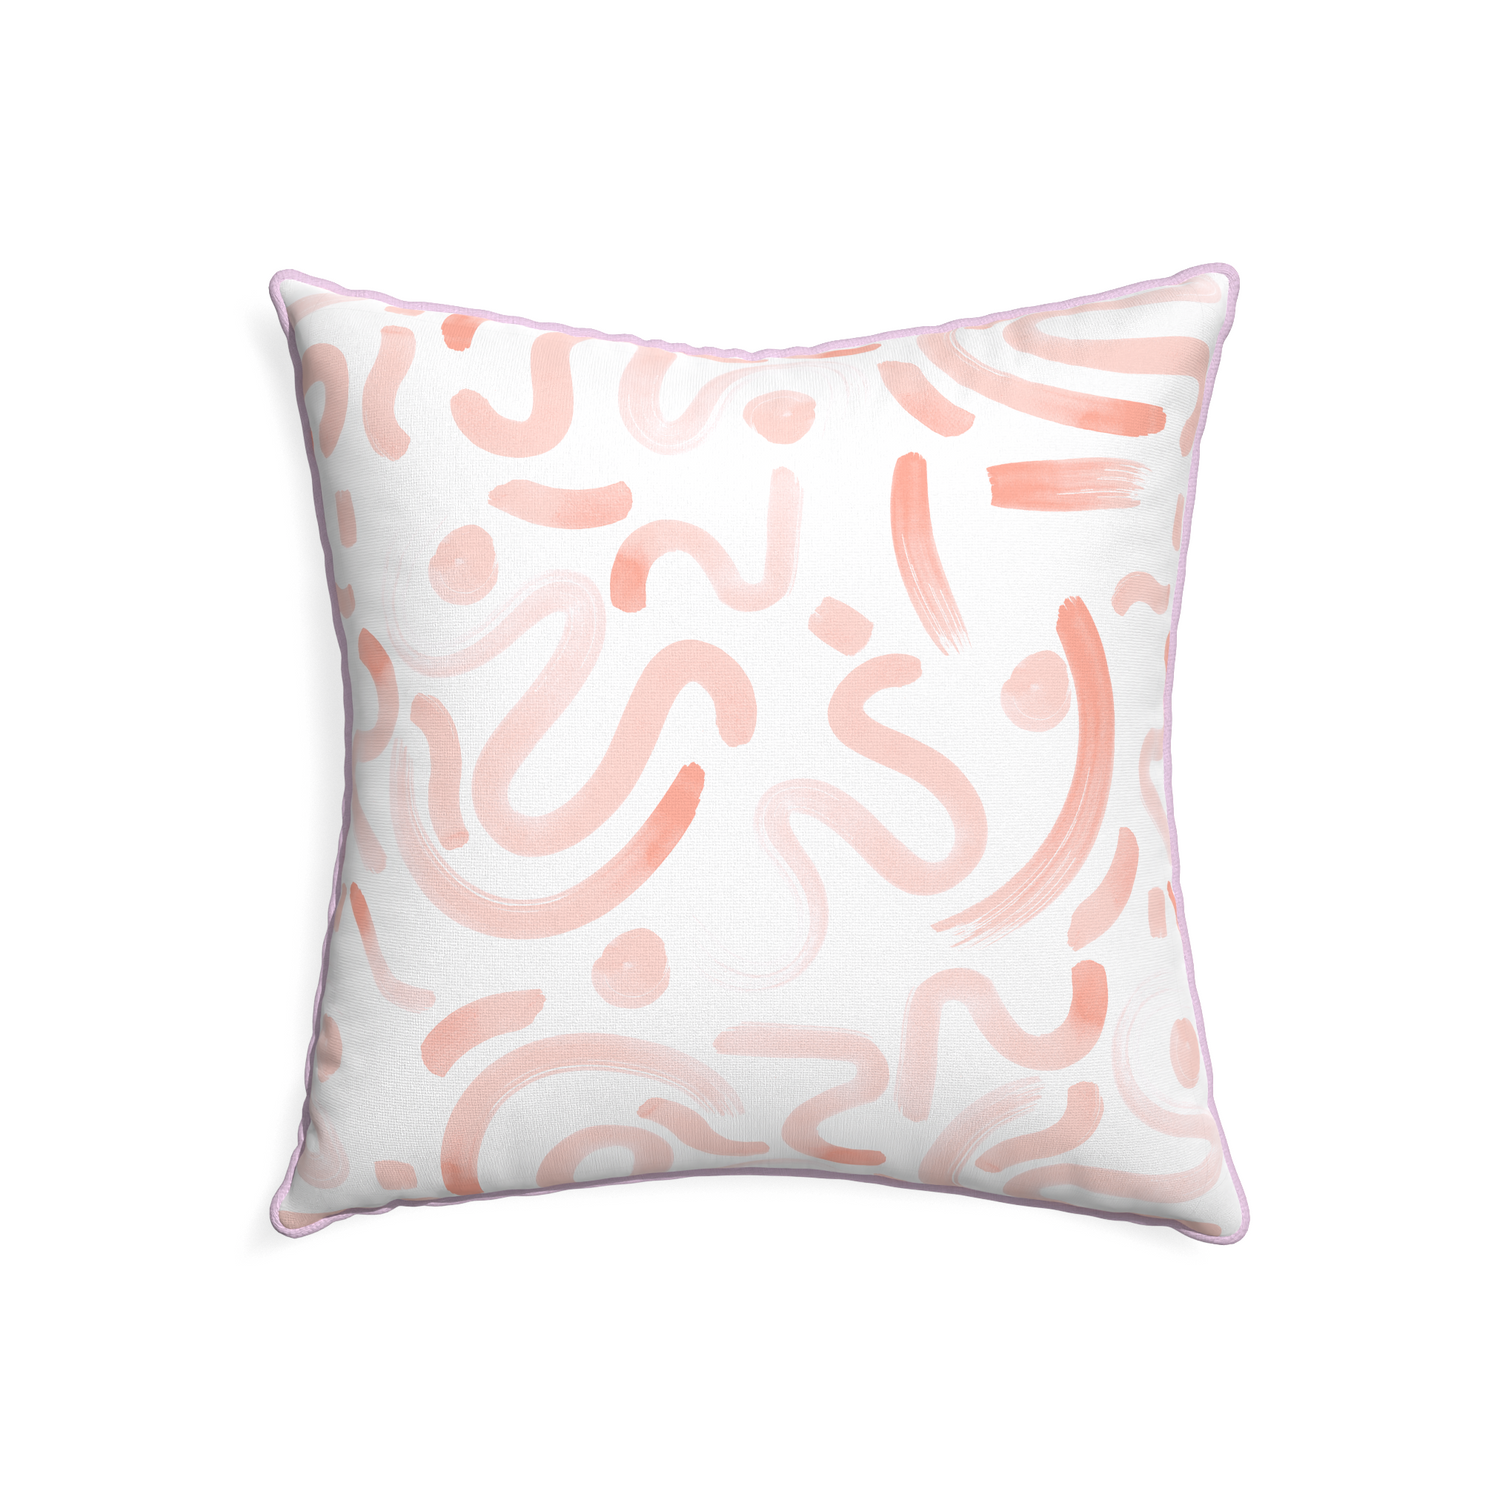 22-square hockney pink custom pillow with l piping on white background